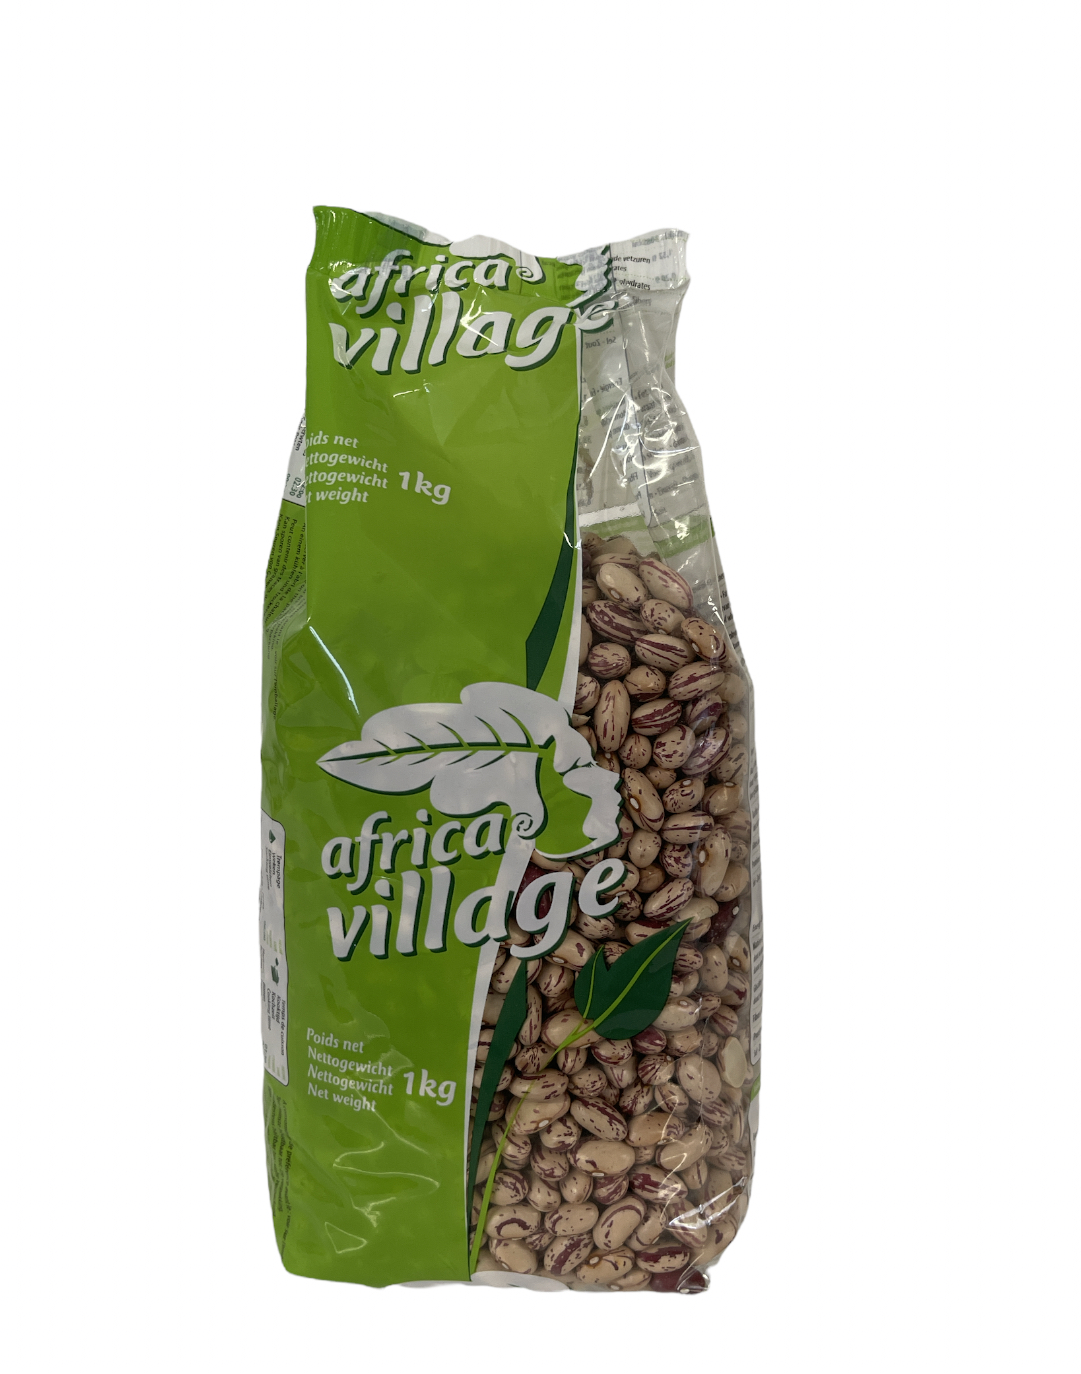 AFRICA VILLAGE HARICOTS/BEANS COCO ROSES 1KG